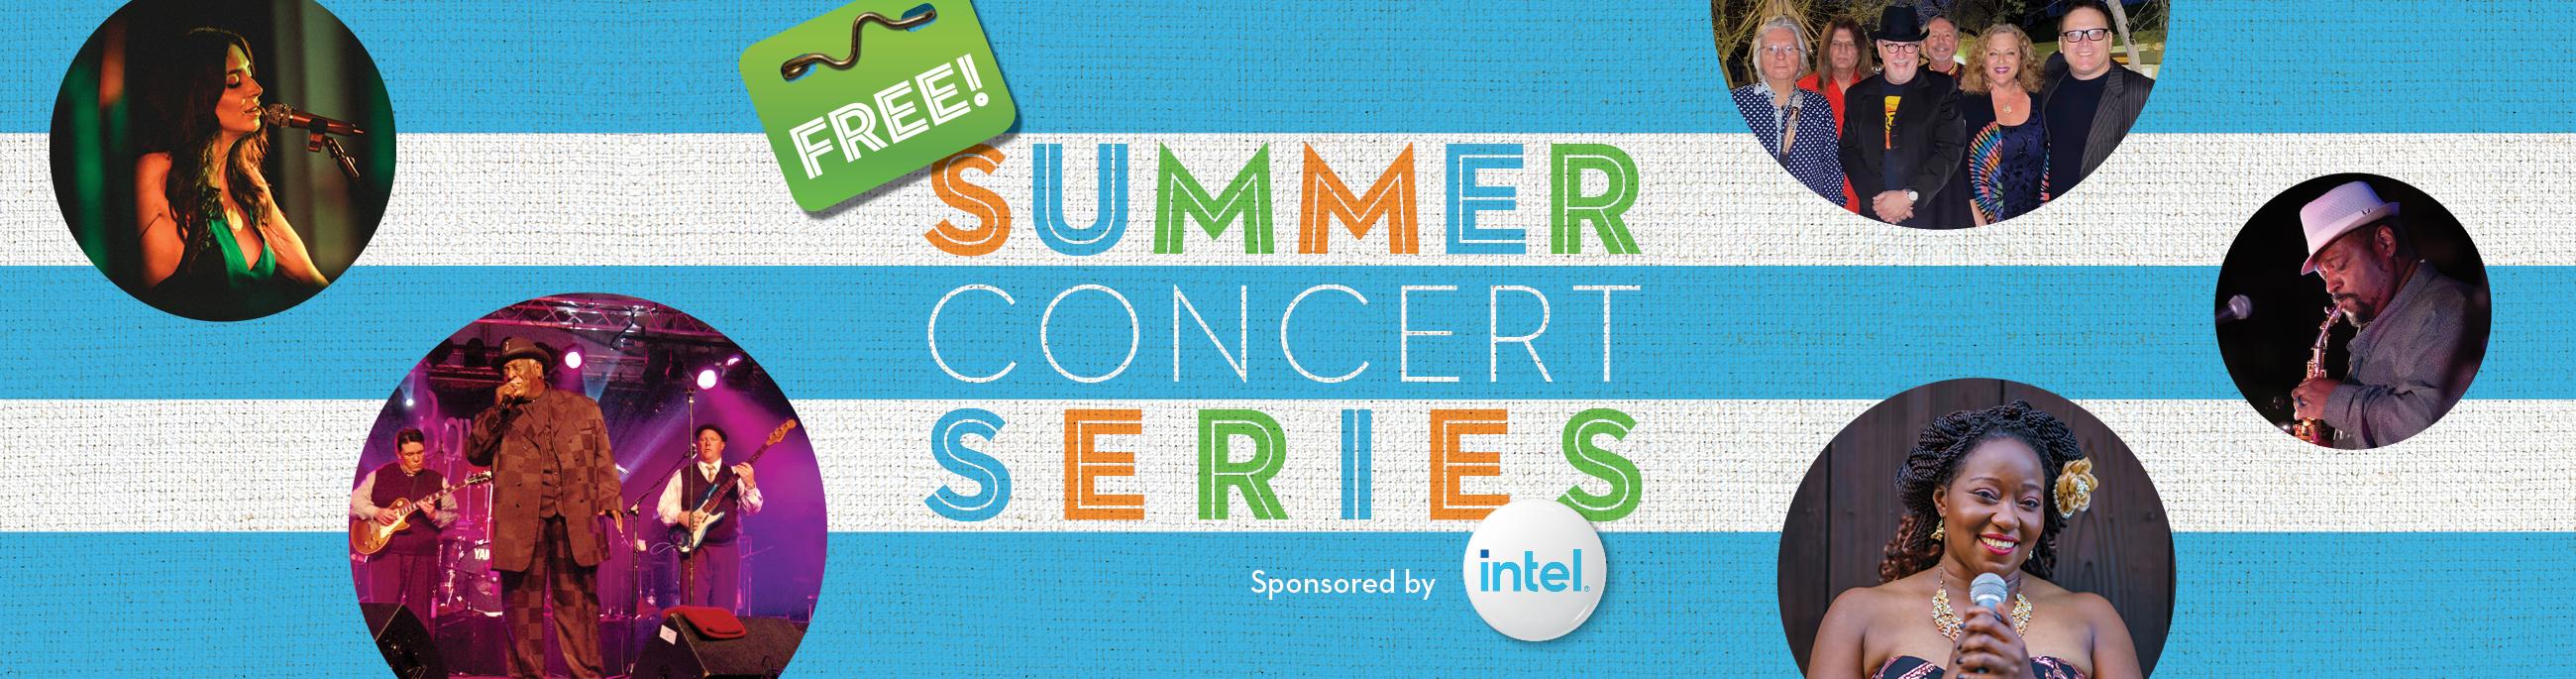 Chandler Center for the Arts Presents its Free Summer Concert Series